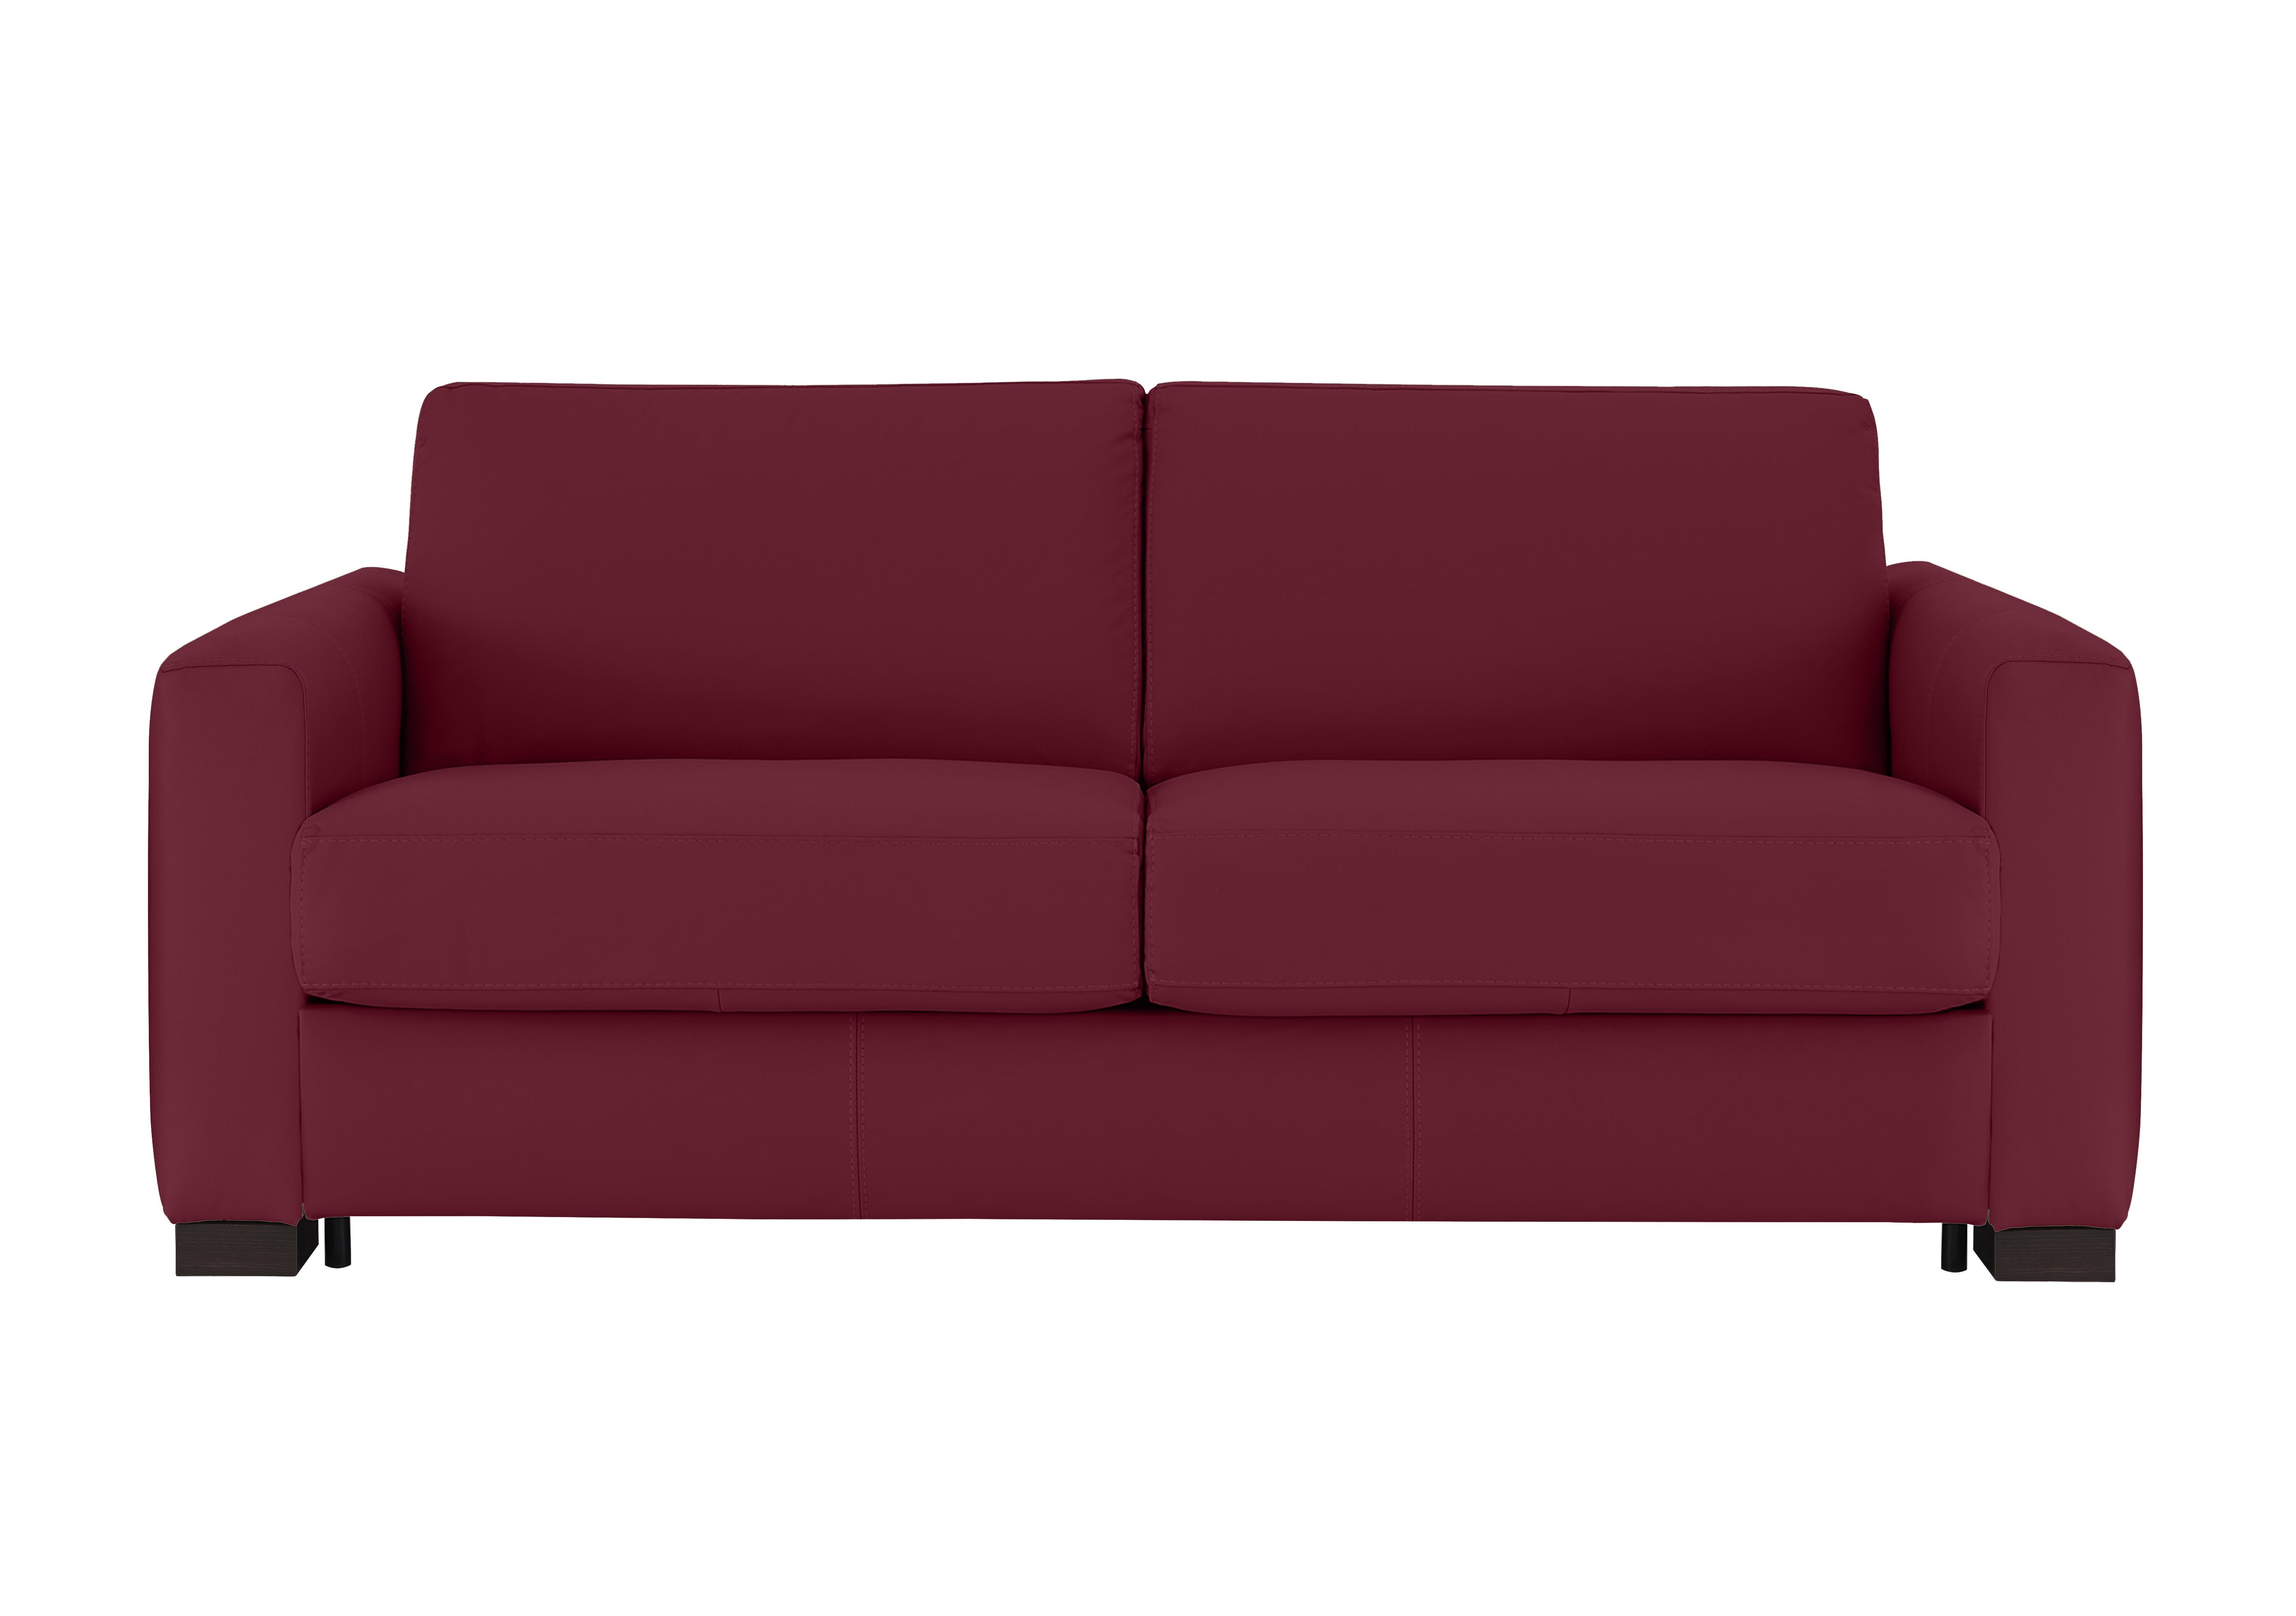 Alcova 3 Seater Leather Sofa Bed with Box Arms in Dali Bordeaux 1521 on Furniture Village